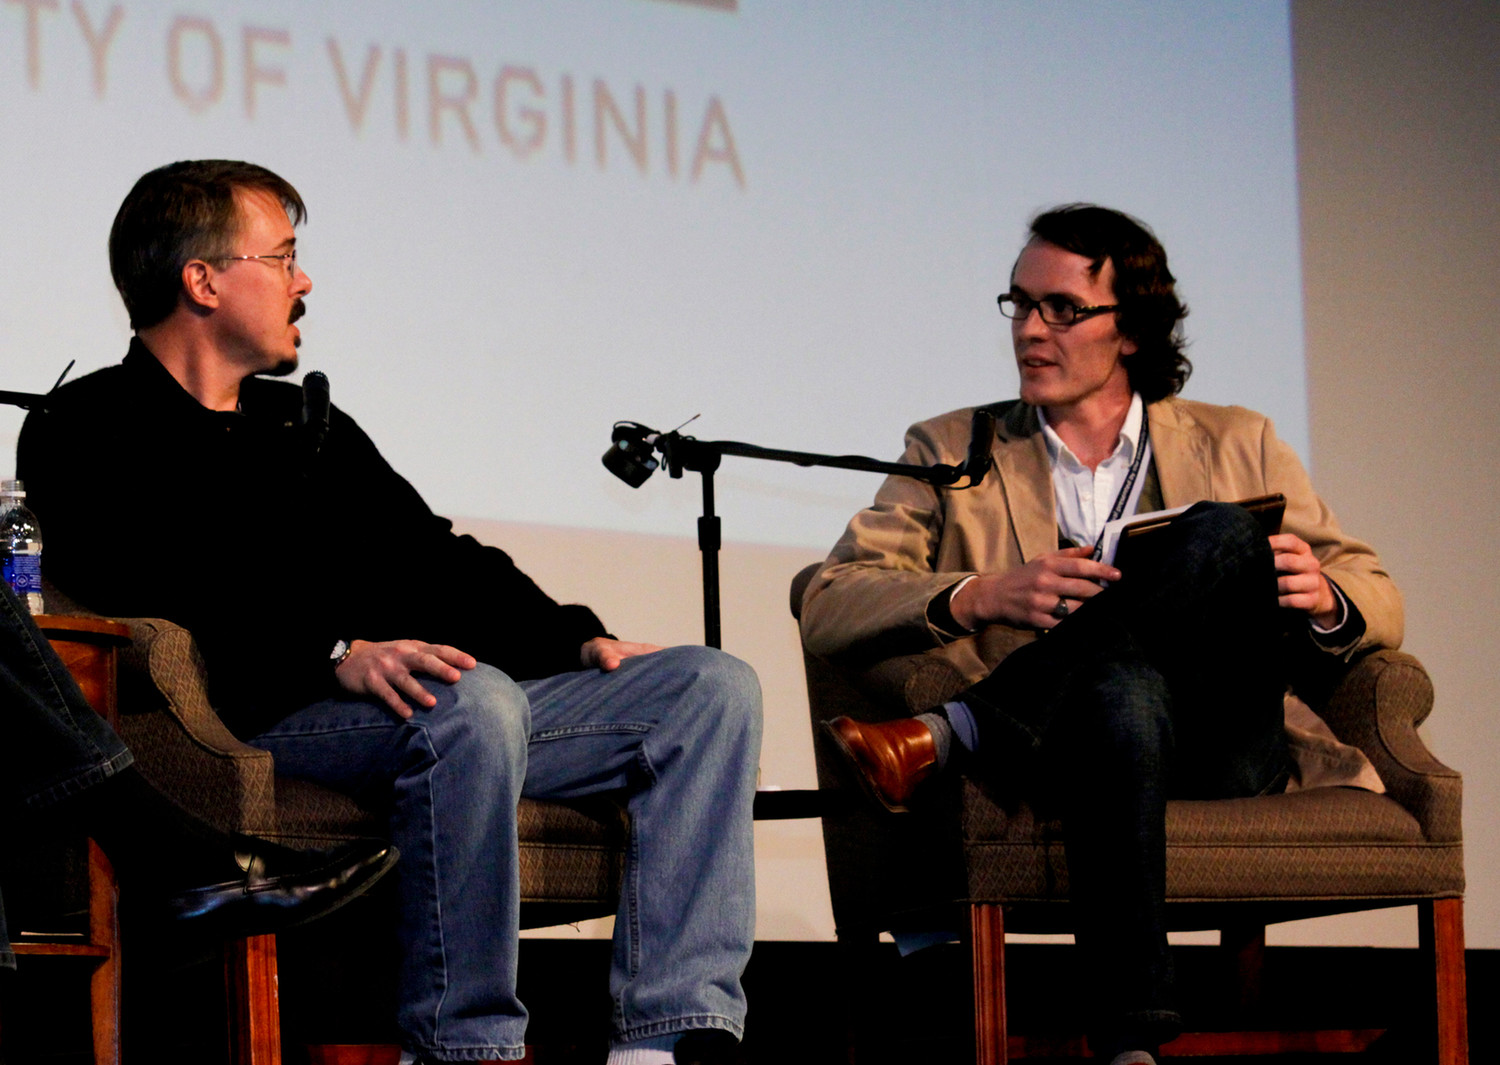 Wesley Harris on stage with creator and writer Vince Gilligan and executive producer Mark Johnson for a discussion of Breaking Bad, 2010 VFF.